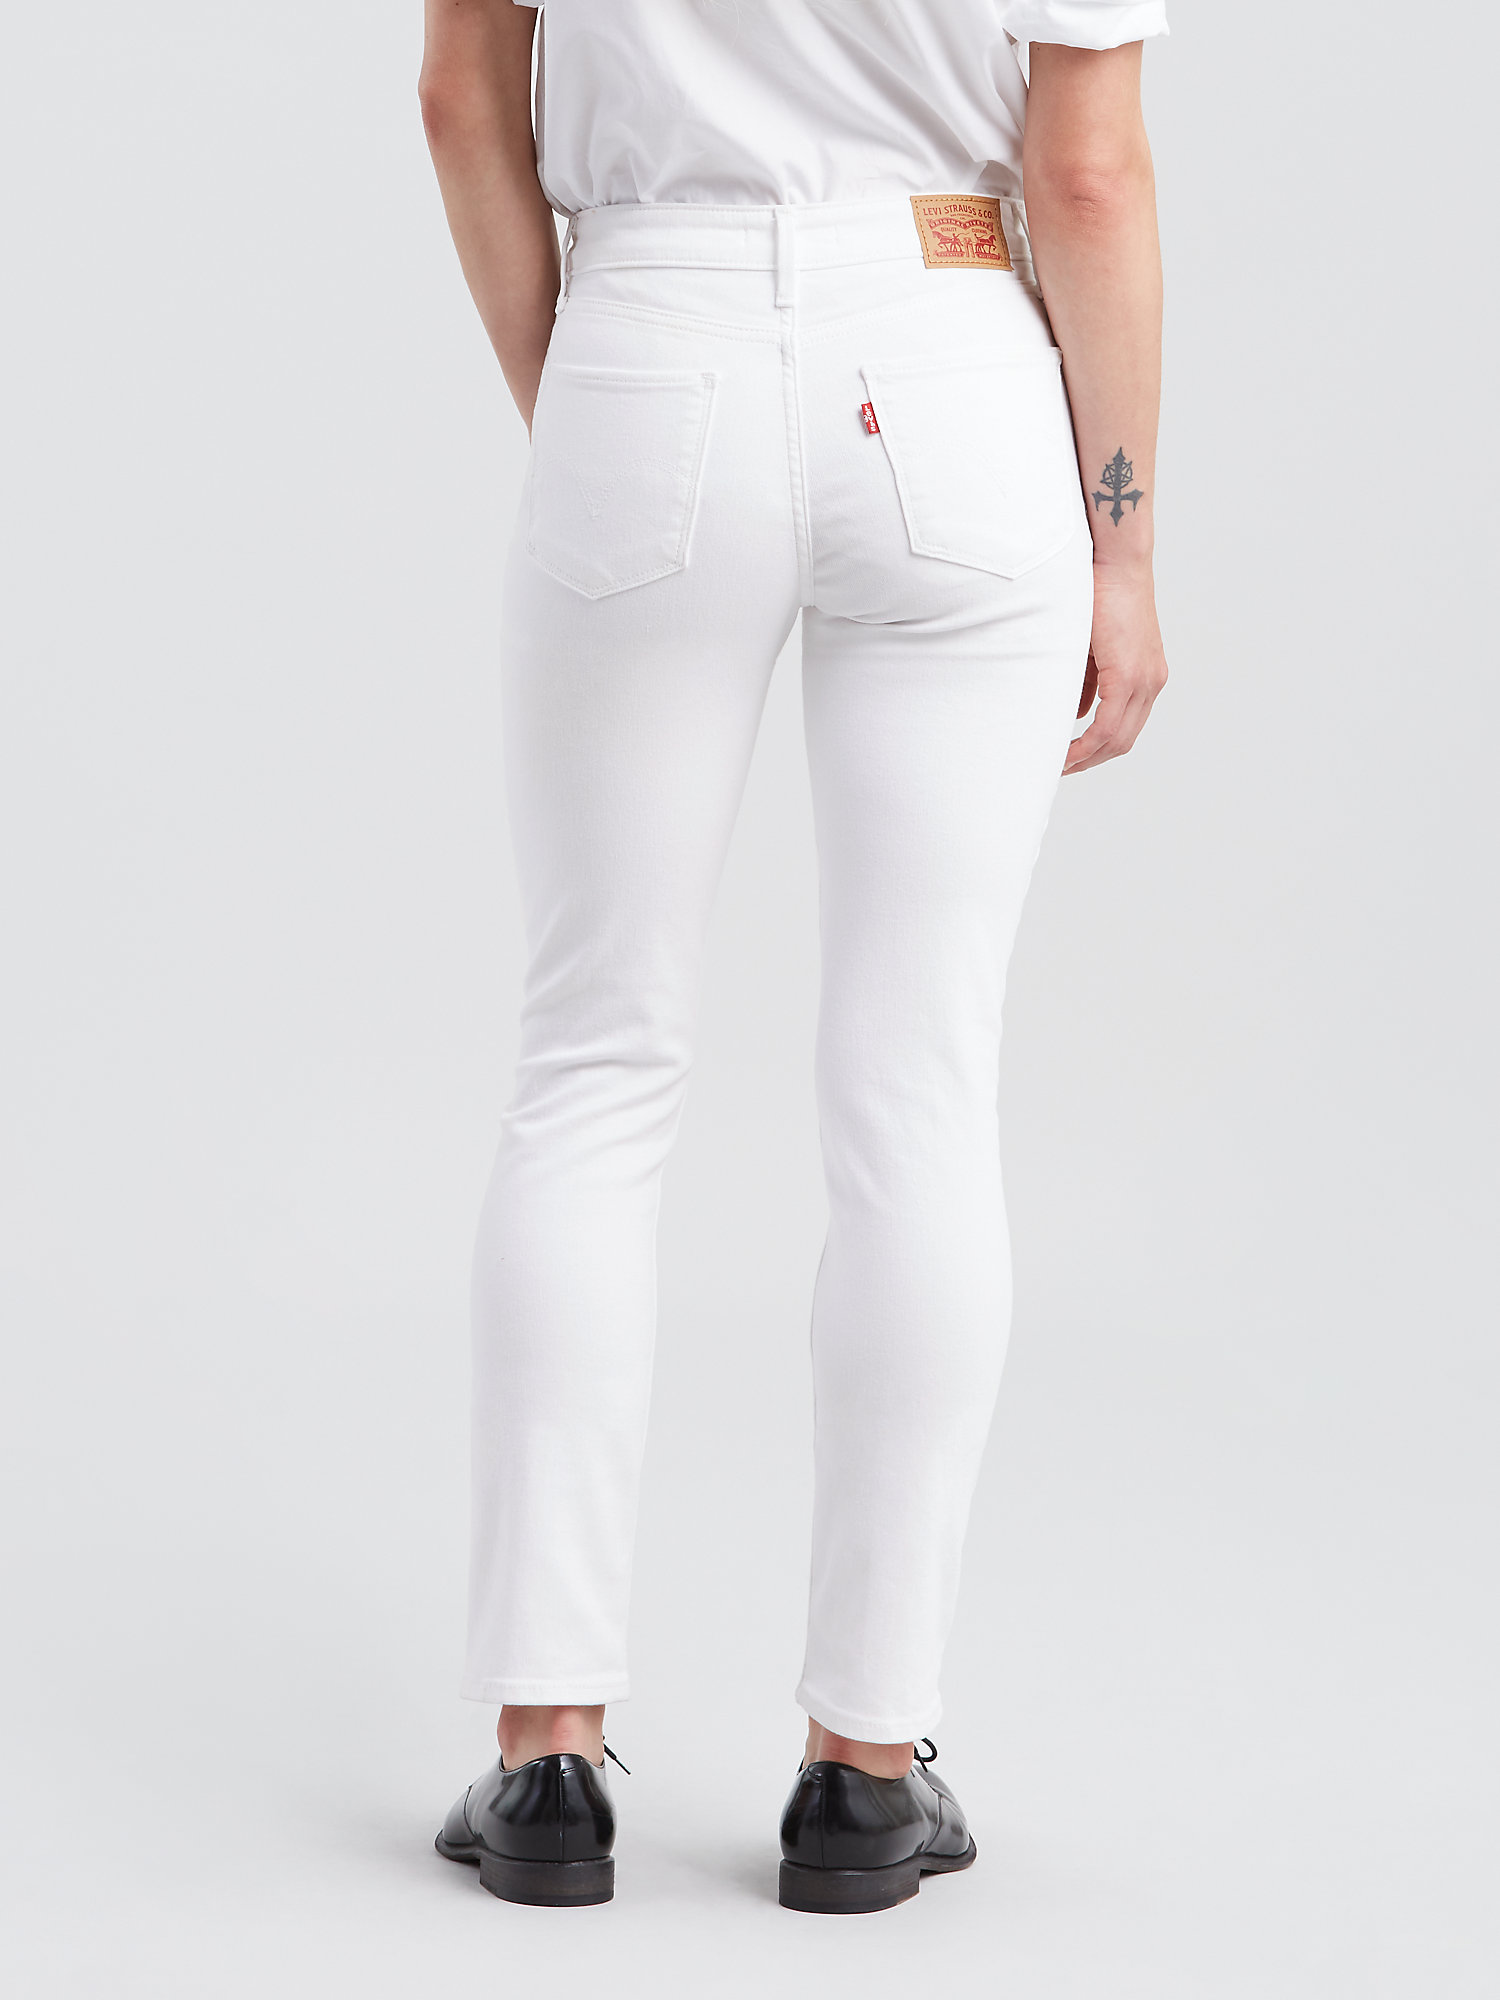 Levi's Women's Classic Modern Mid Rise Skinny Jeans White Size 14